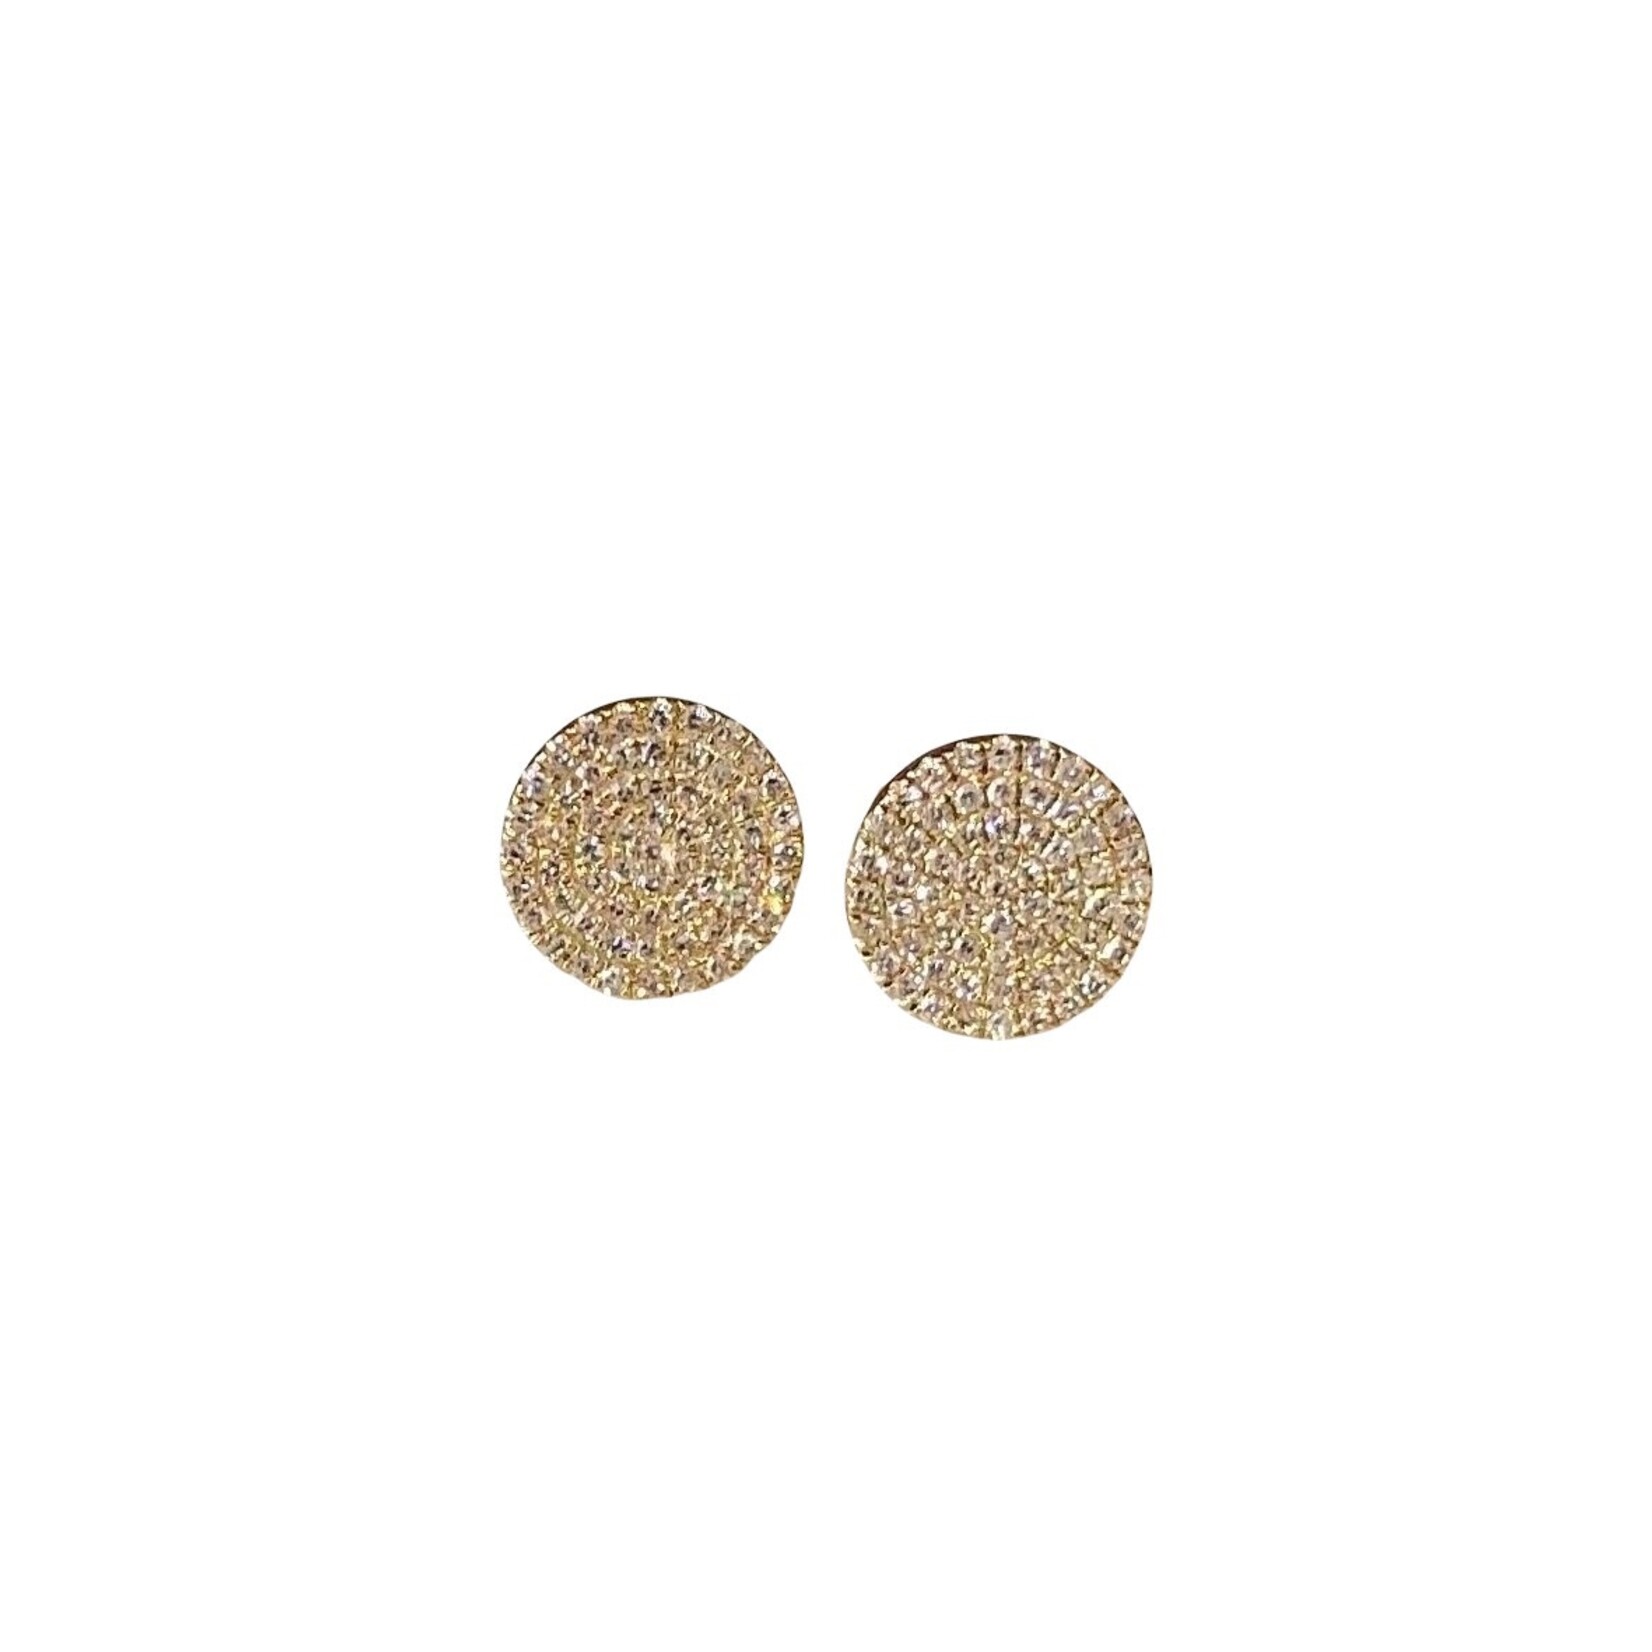 Andi Alyse Pave Diamond and 14k Yellow Gold Disc Stud Earrings